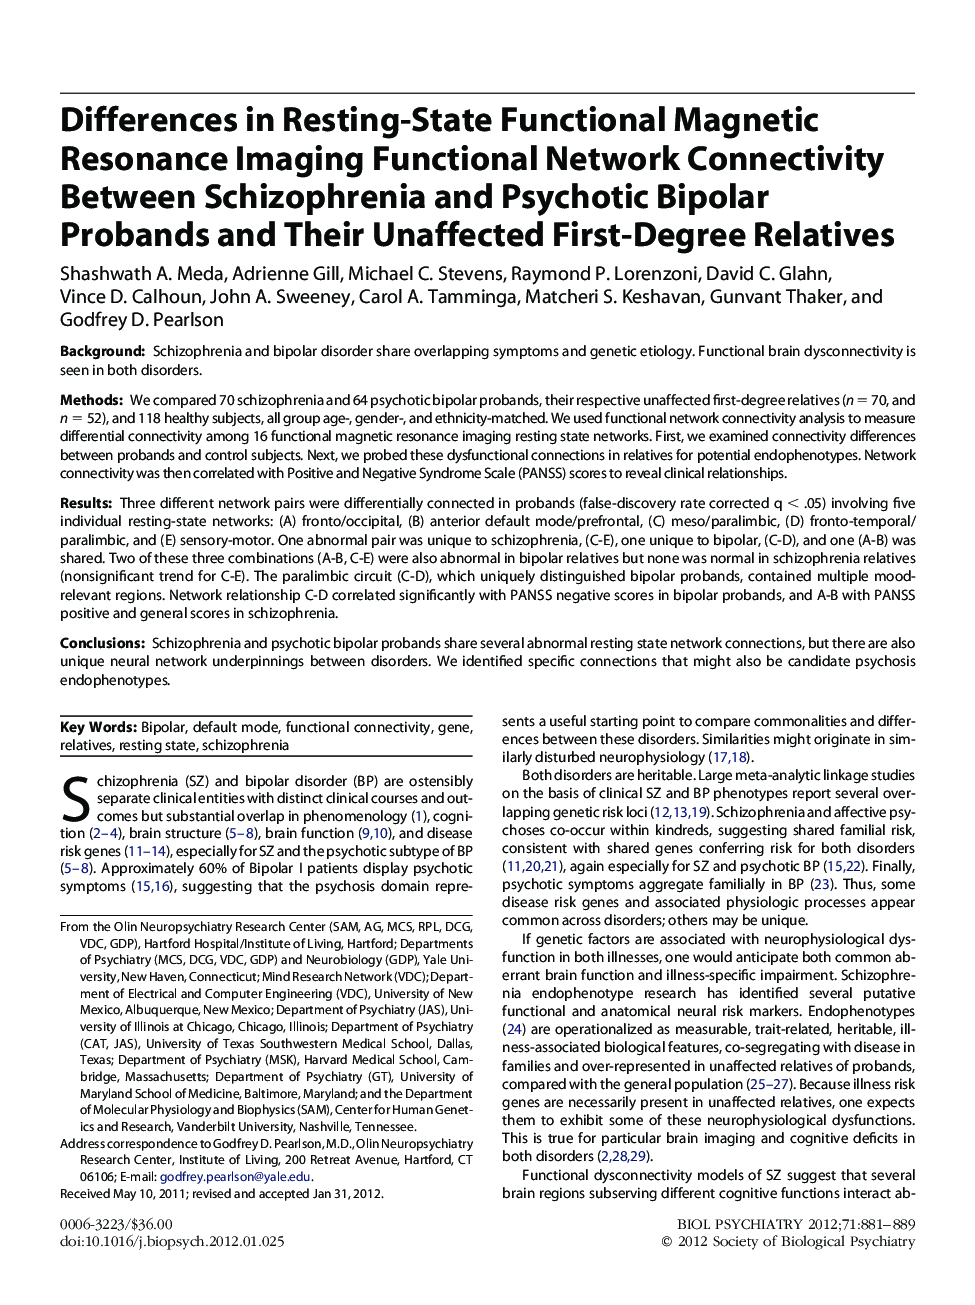 Differences in Resting-State Functional Magnetic Resonance Imaging Functional Network Connectivity Between Schizophrenia and Psychotic Bipolar Probands and Their Unaffected First-Degree Relatives